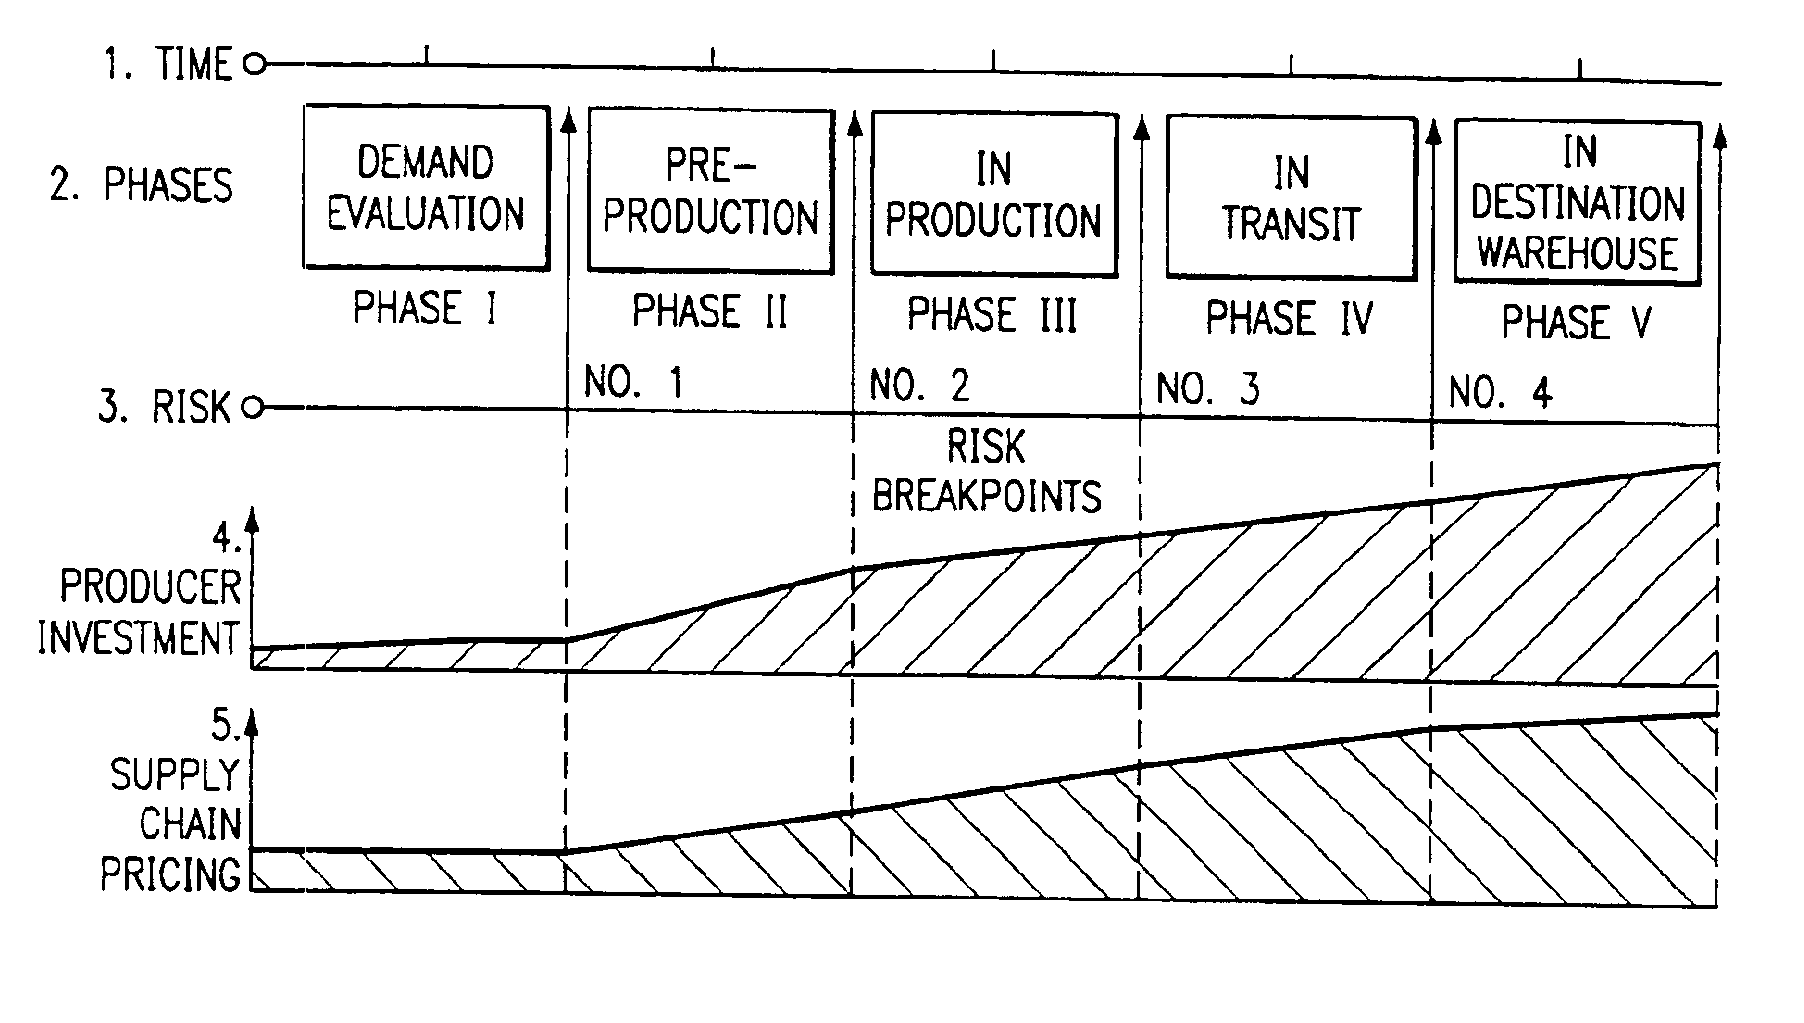 Method of producing, selling, and distributing articles of manufacture